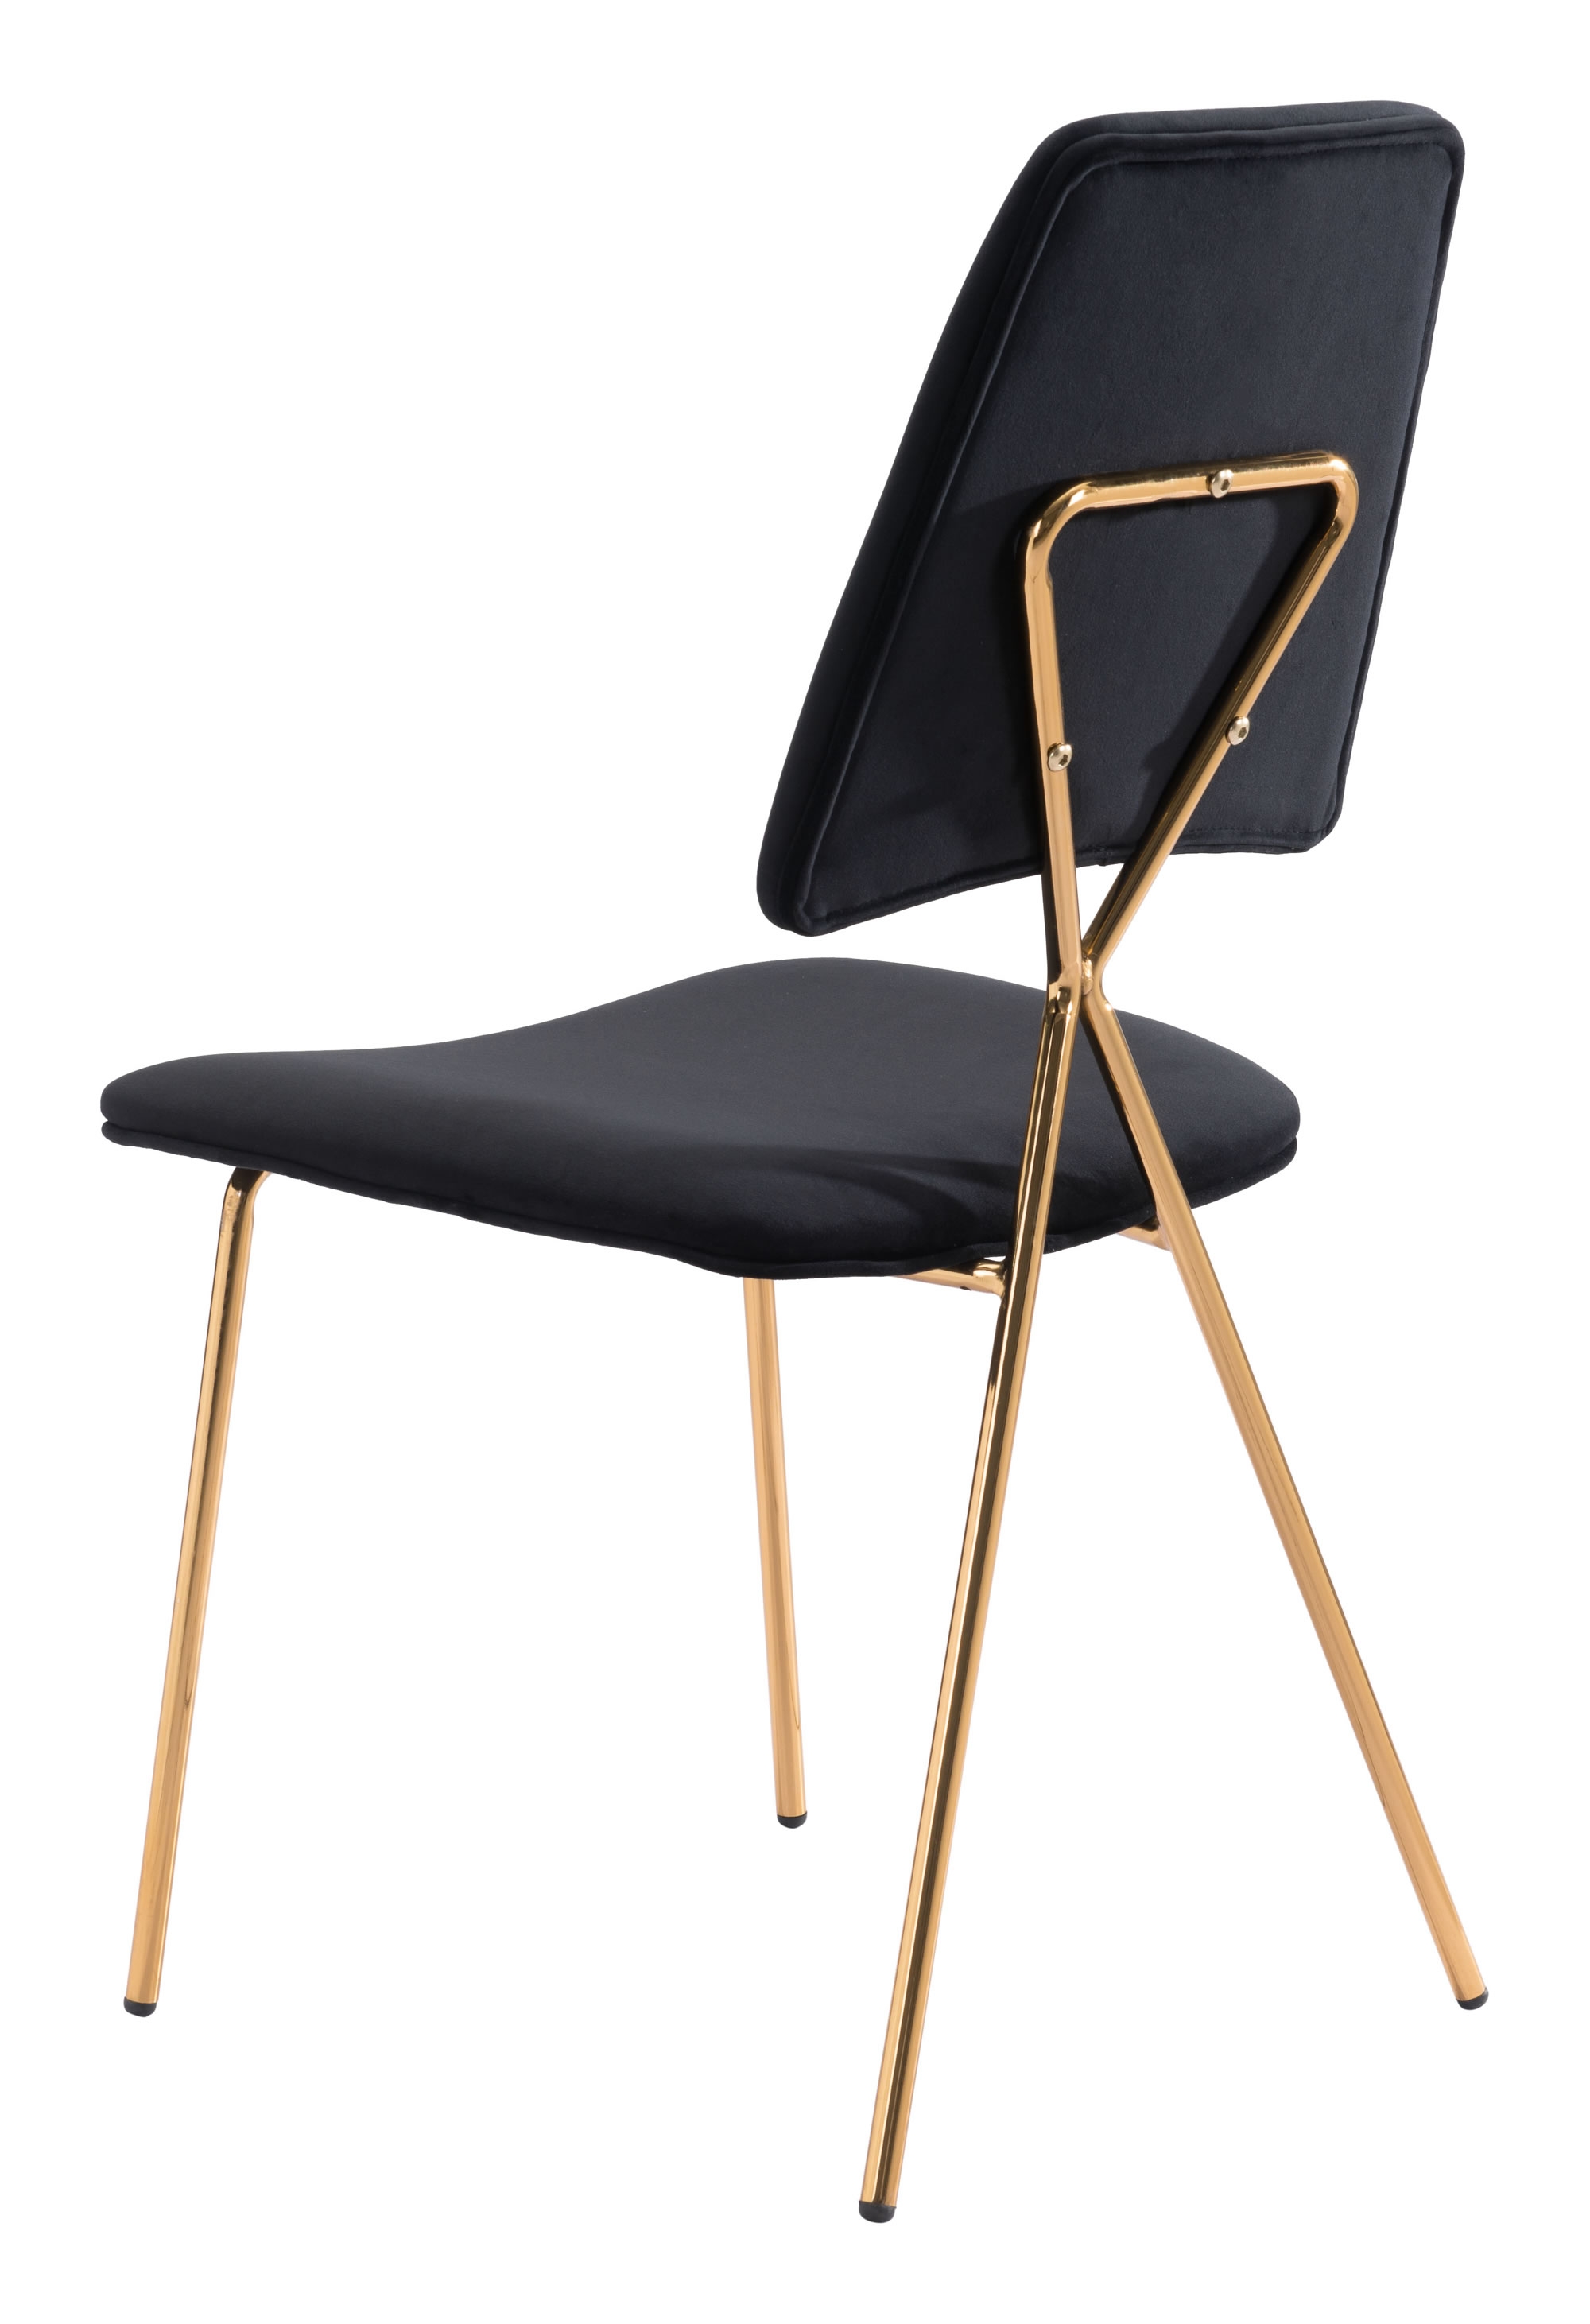 Chloe Dining Chair (Set of 2) Black & Gold - Image 4